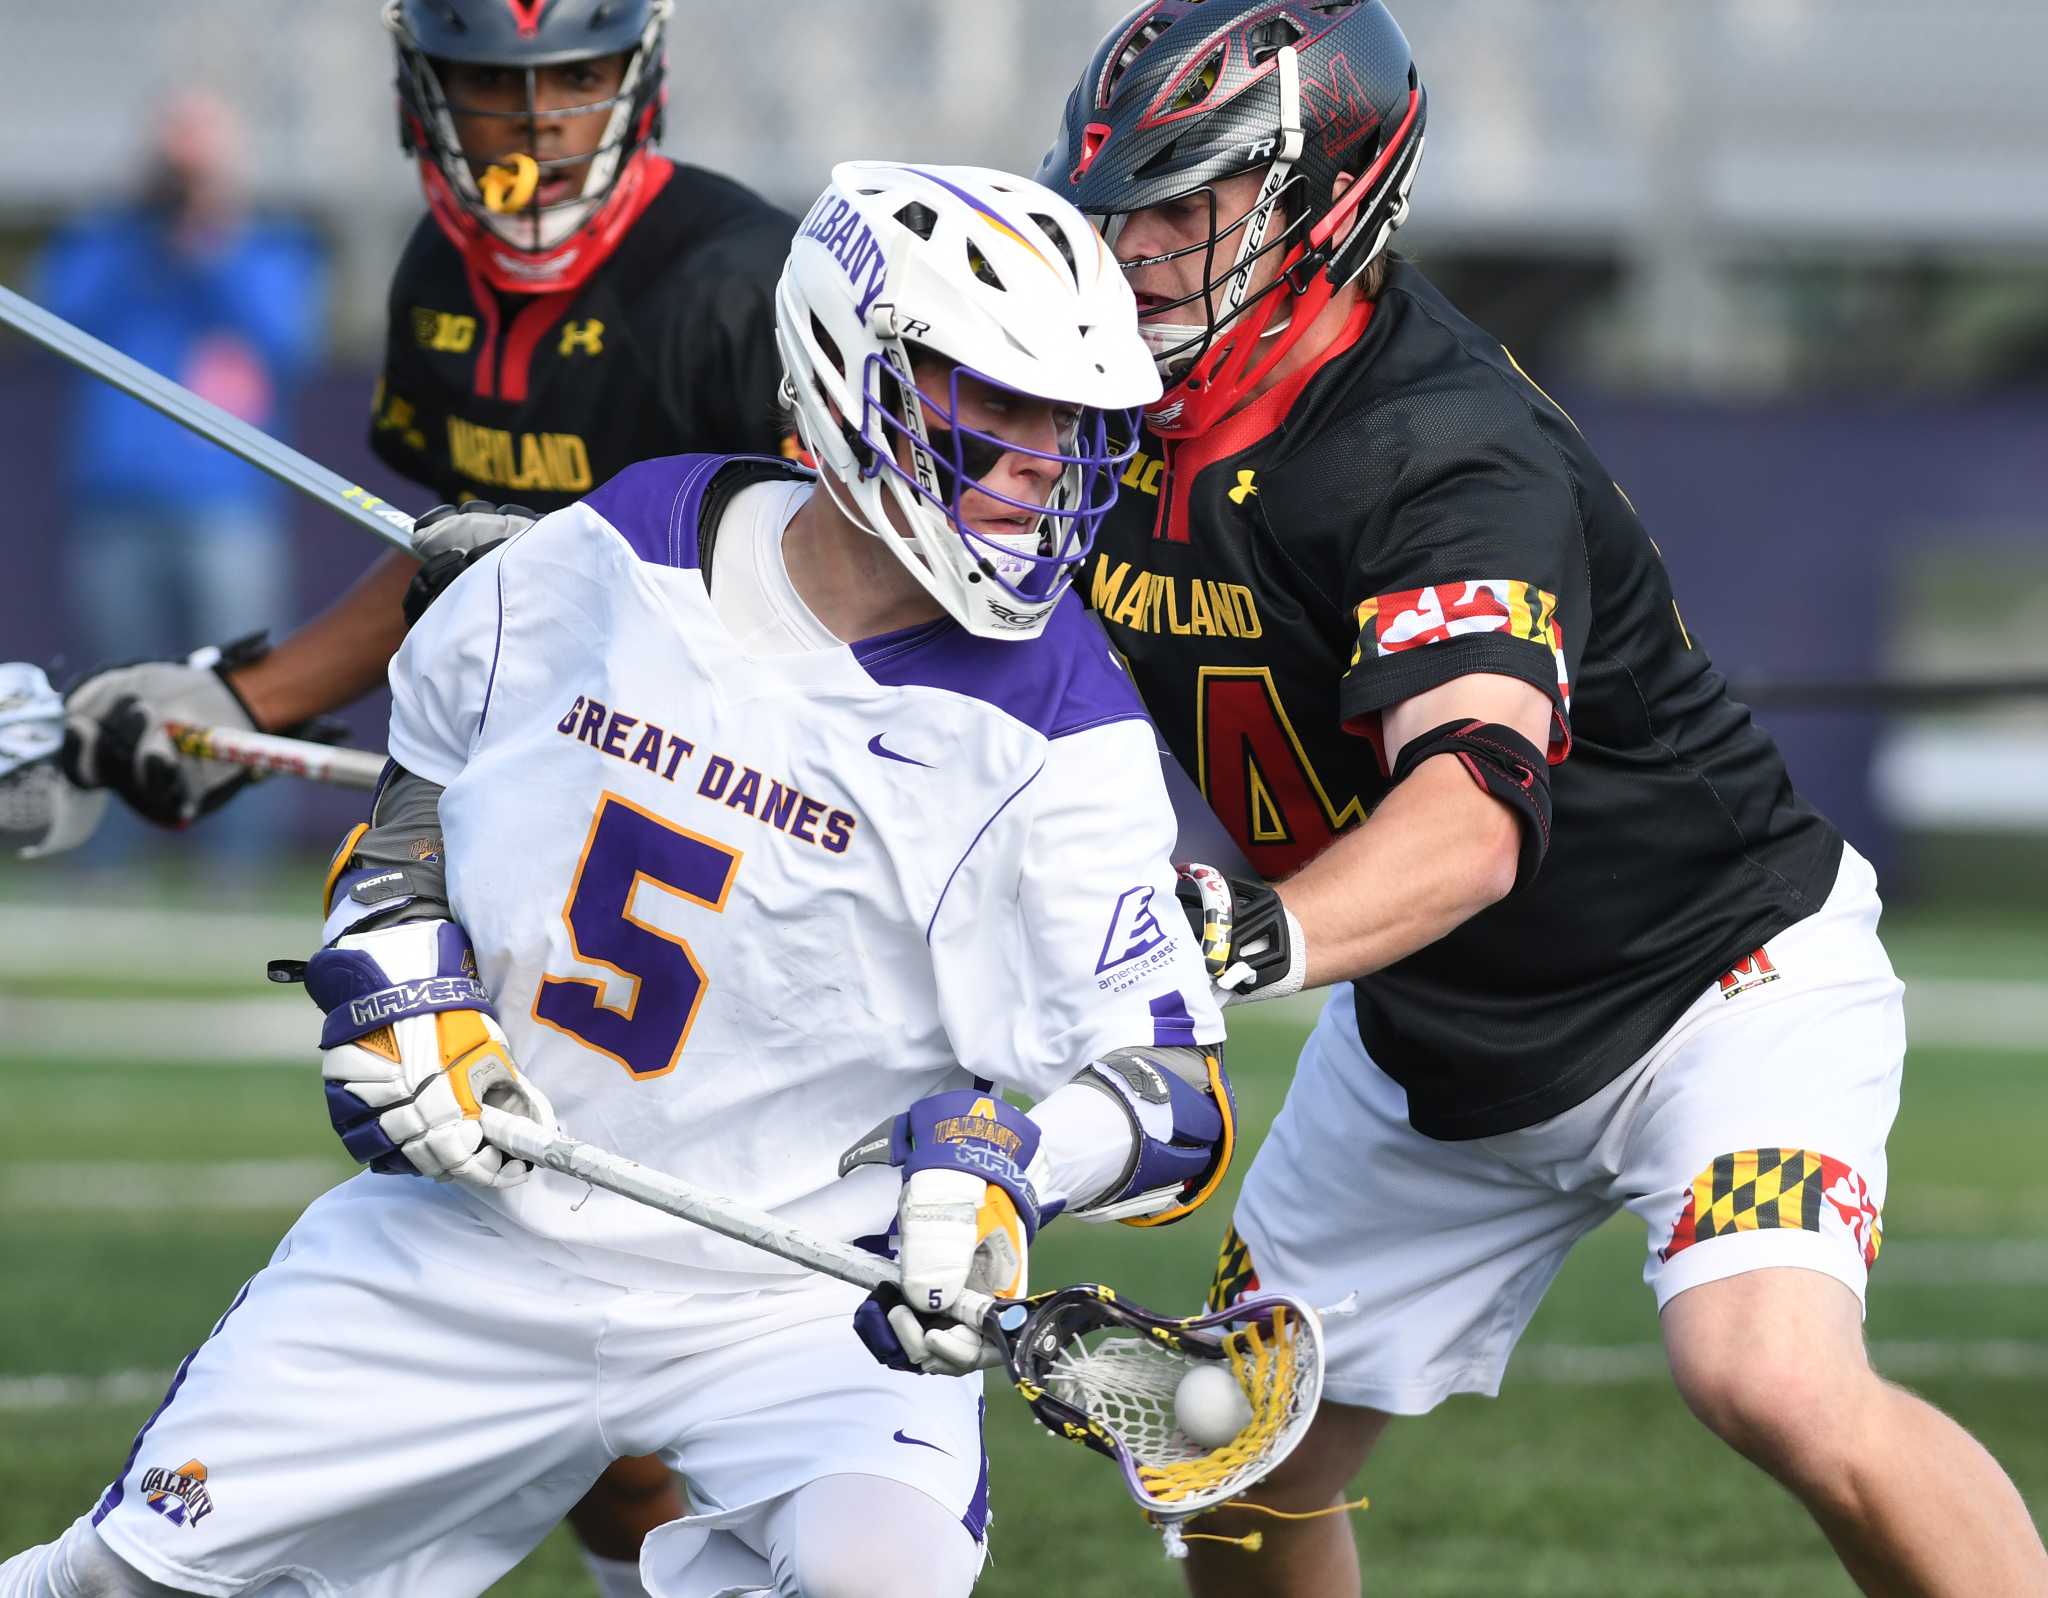 UAlbany men's lacrosse stands on doorstep of Final Four - Albany Times Union